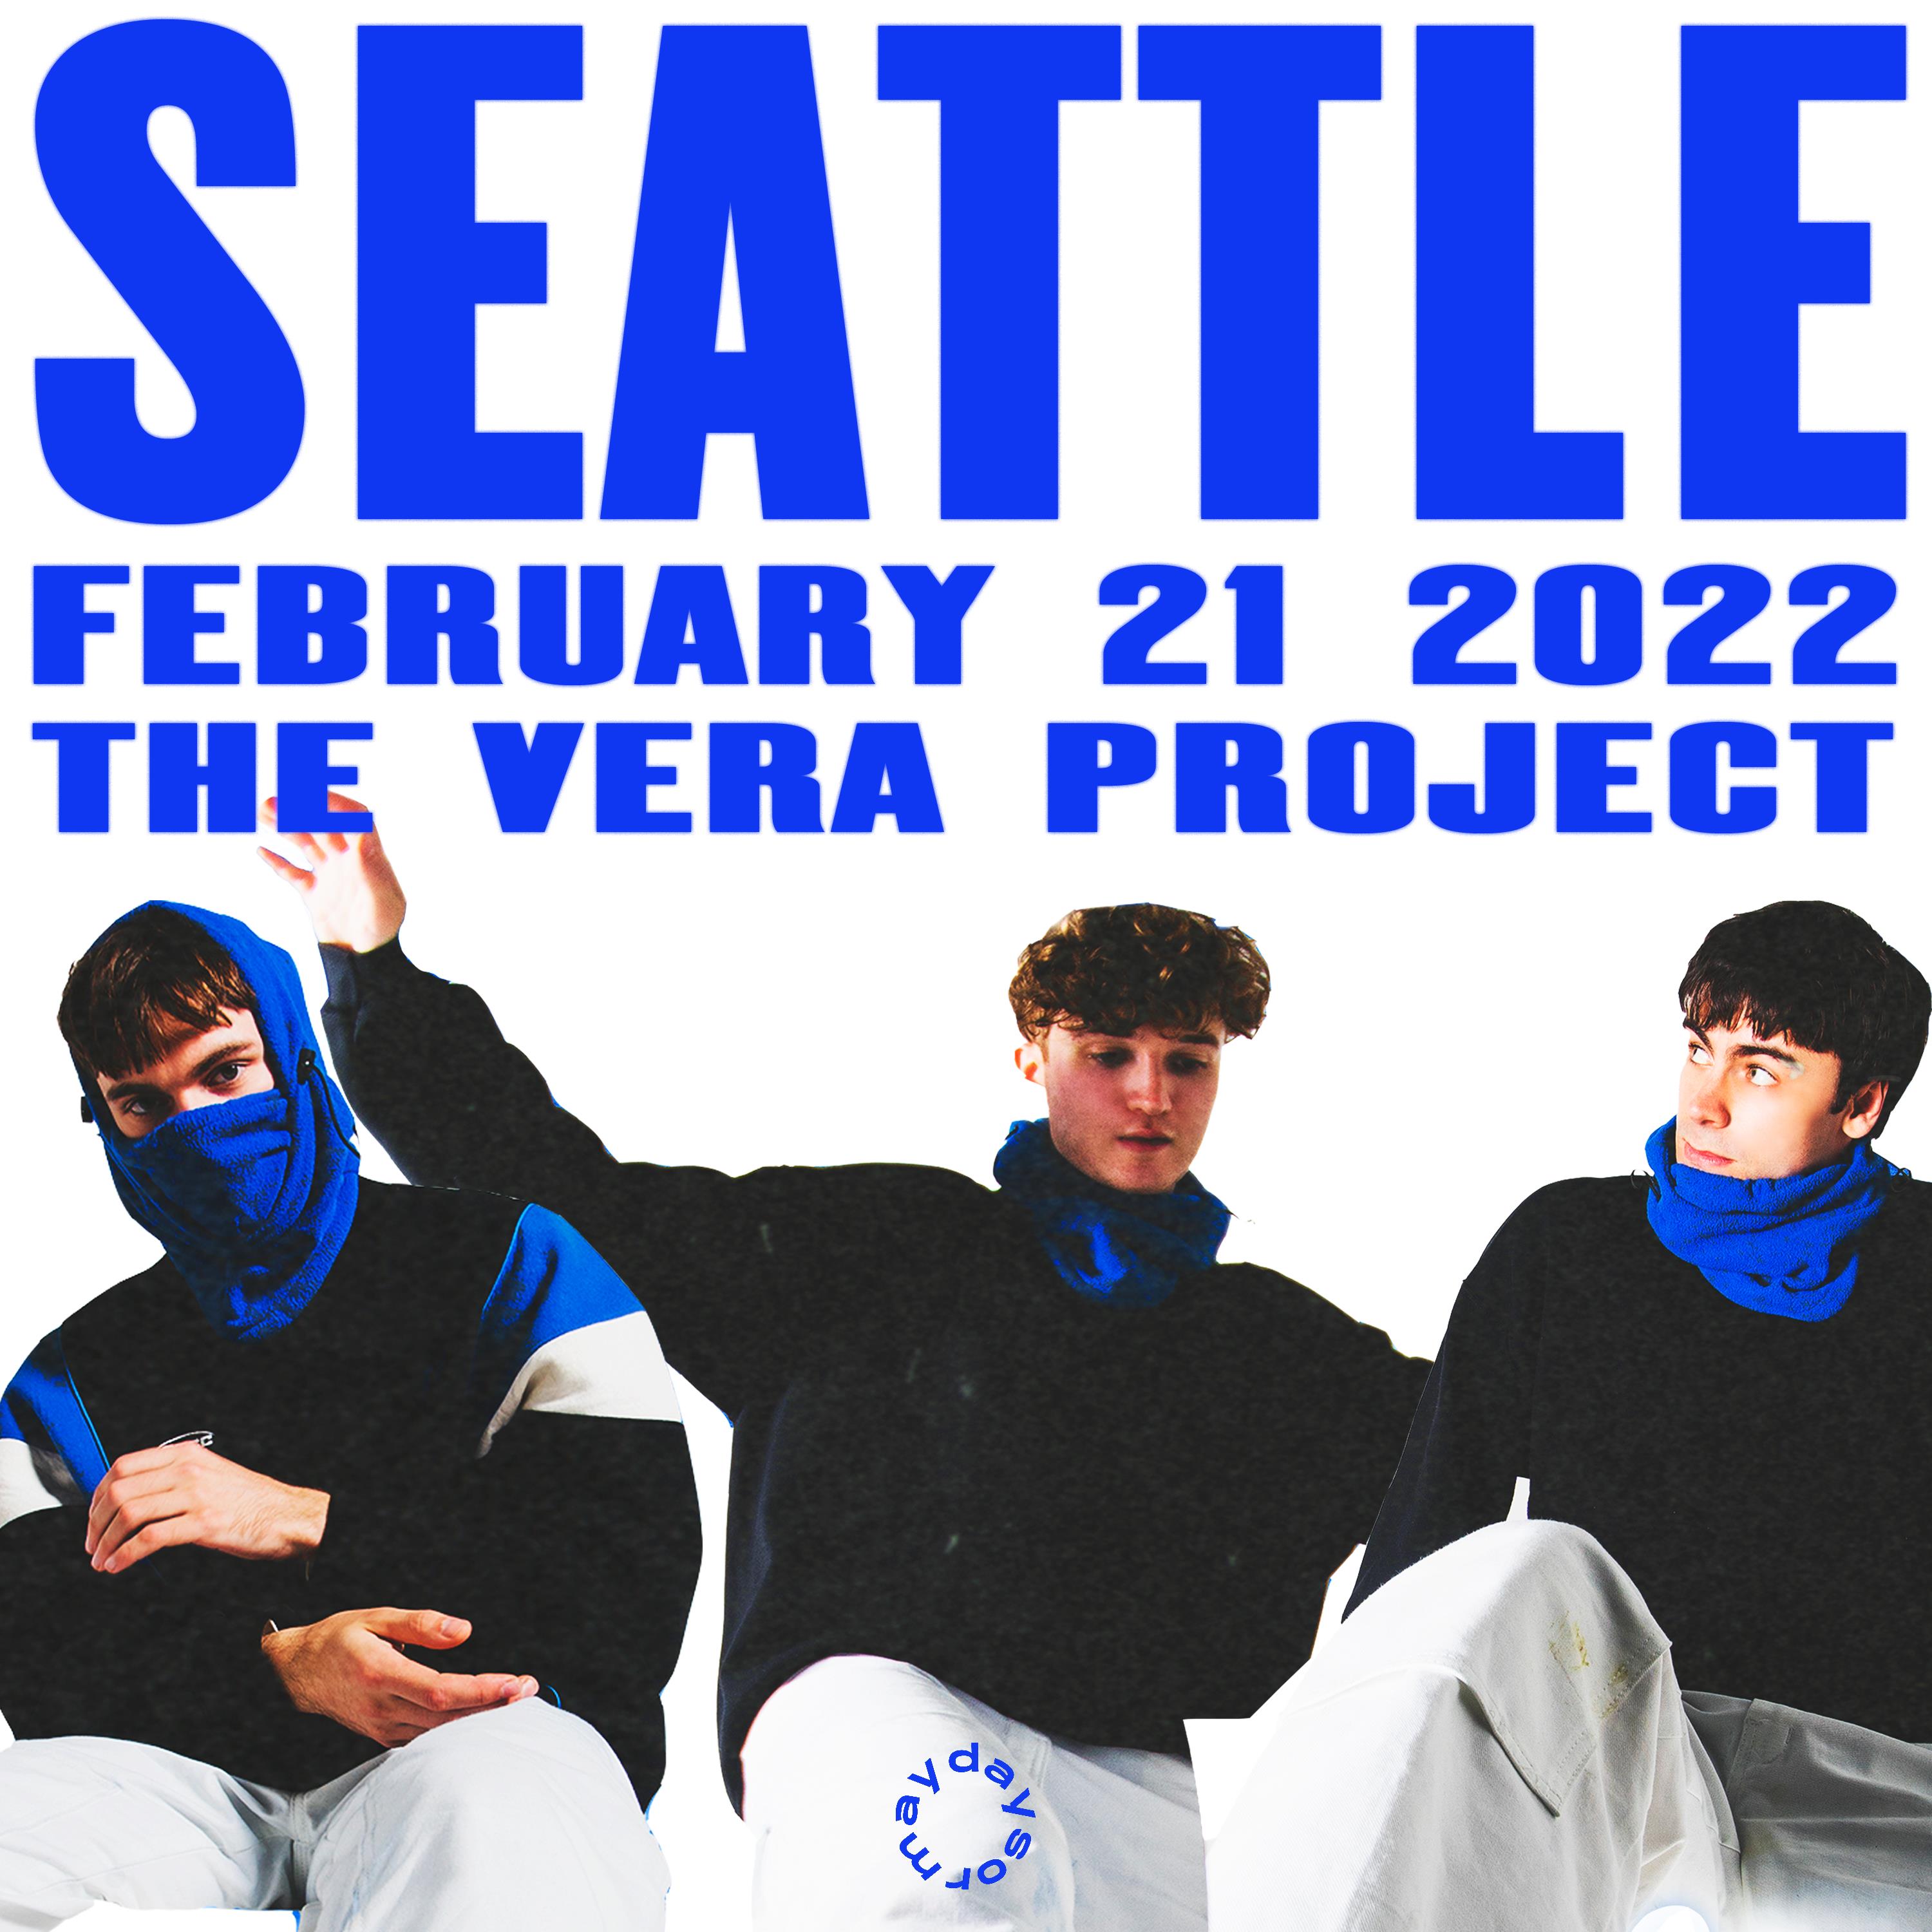 Buy Tickets to daysormay The Vera Project in Seattle on Feb 21, 2022